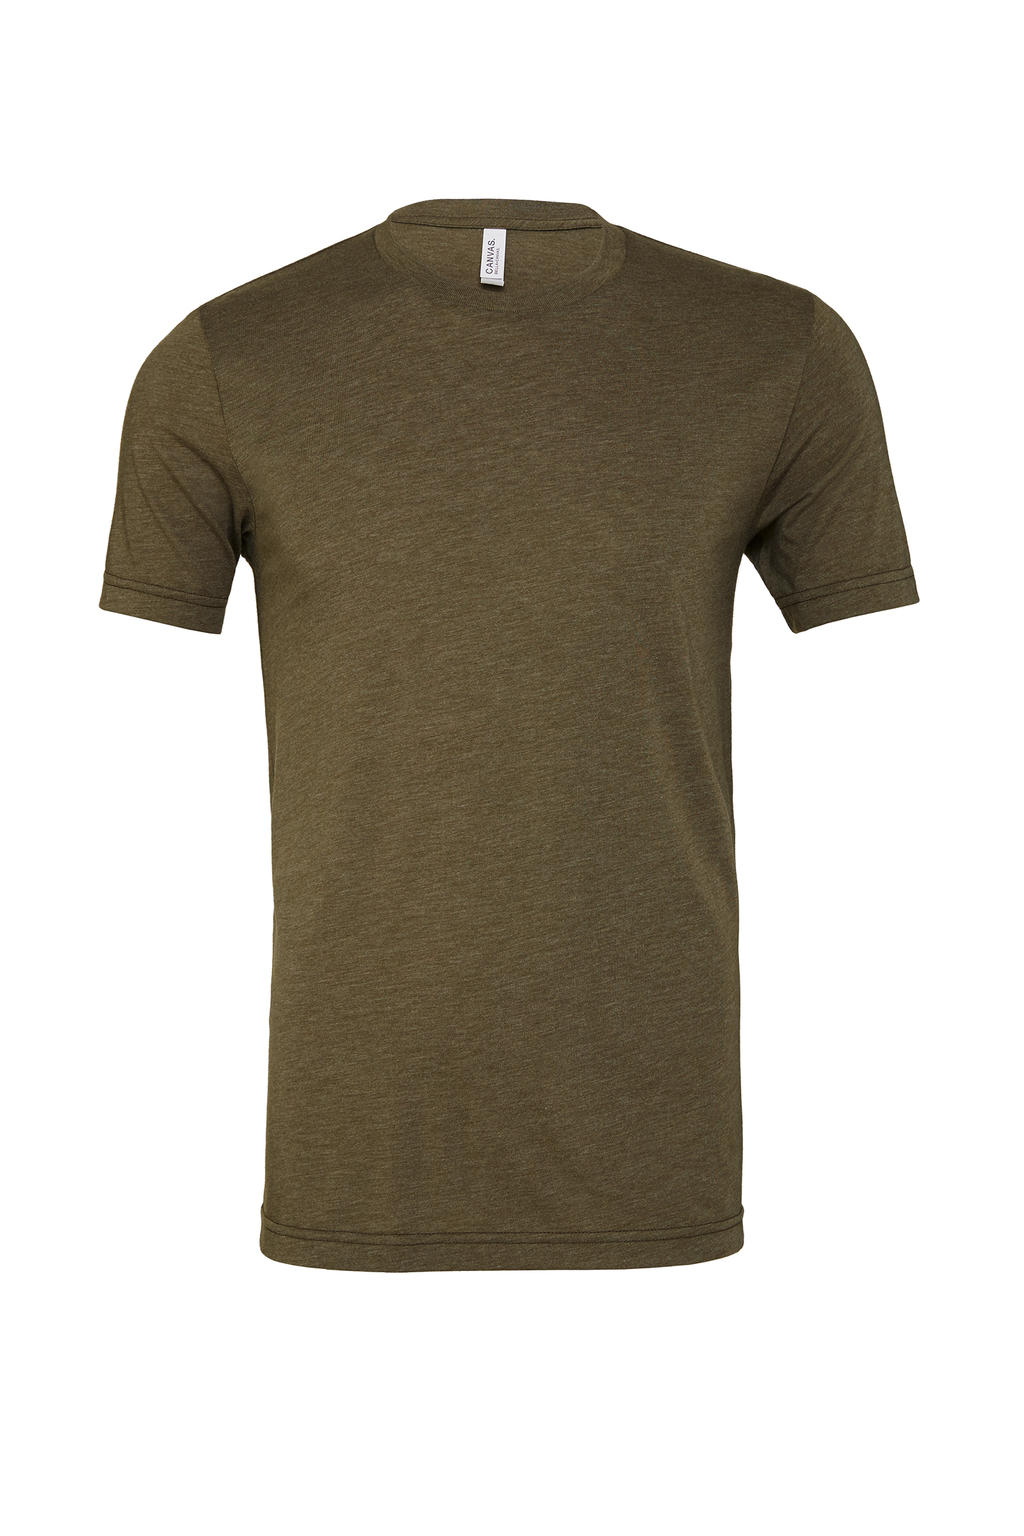  Unisex Triblend Short Sleeve Tee in Farbe Olive Triblend